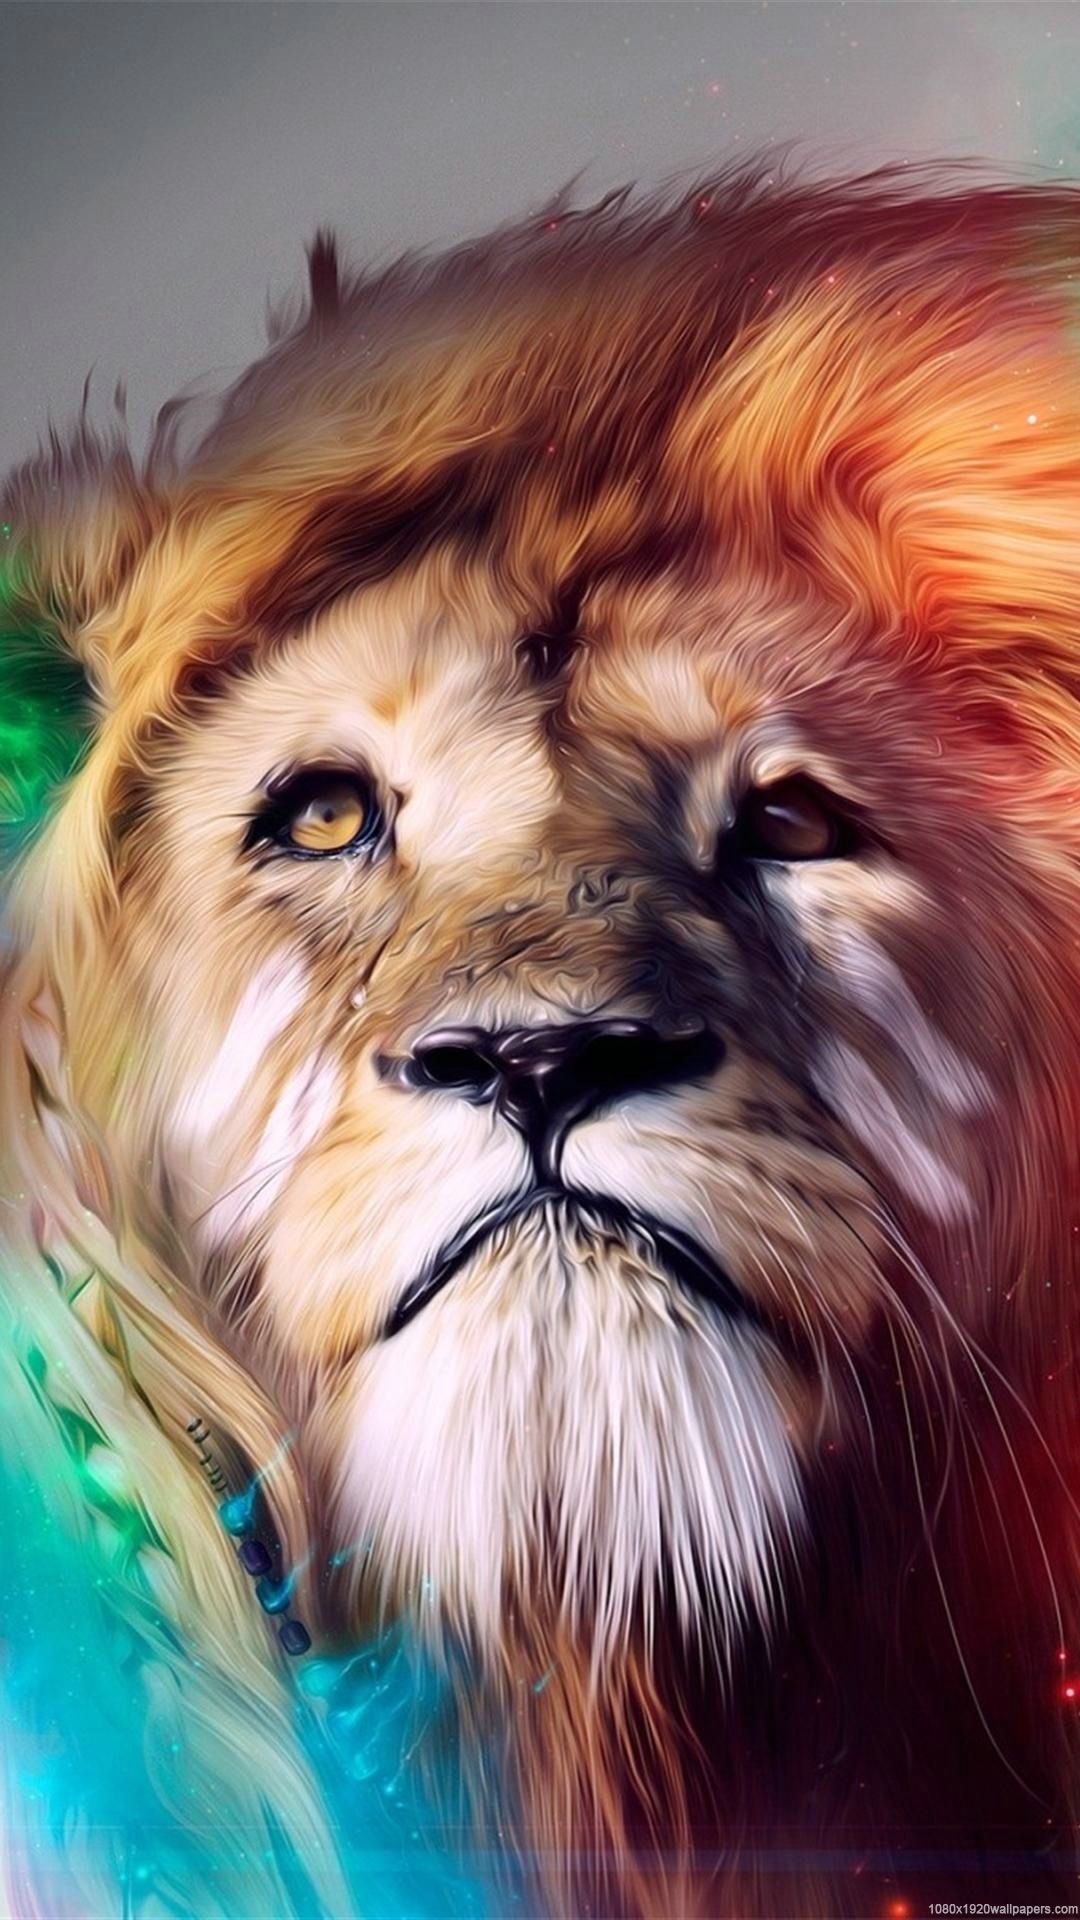 1080x1920, Cool Lion Color Wallpapers Hd 
 Data Id - New Hd Wallpapers For Iphone - HD Wallpaper 